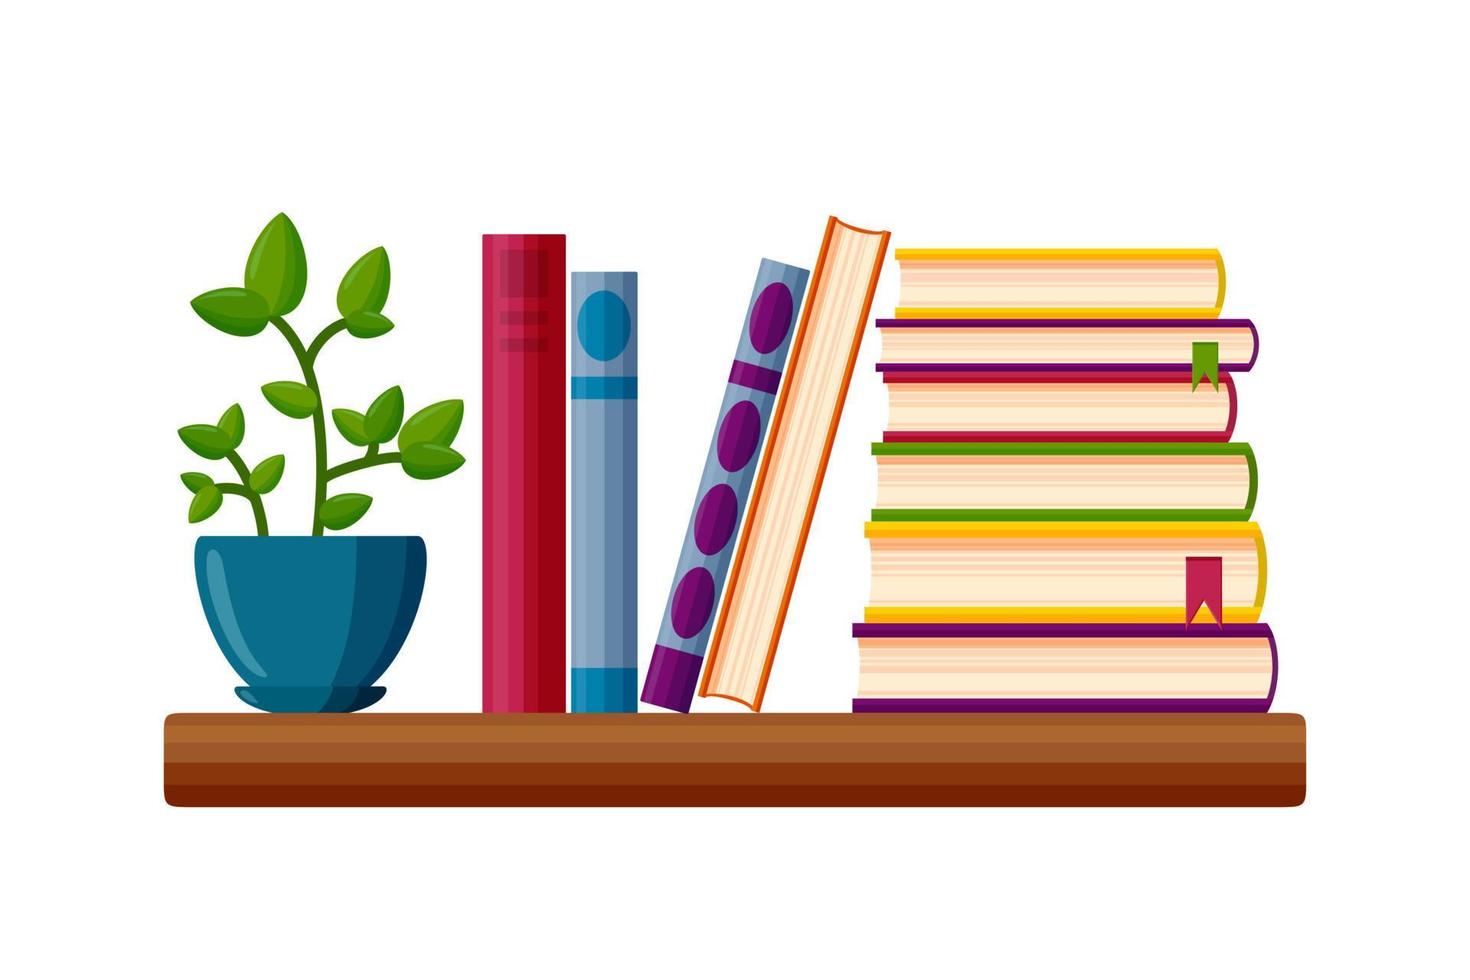 Bookshelf with potted plant. Books in cartoon style. Vector illustration